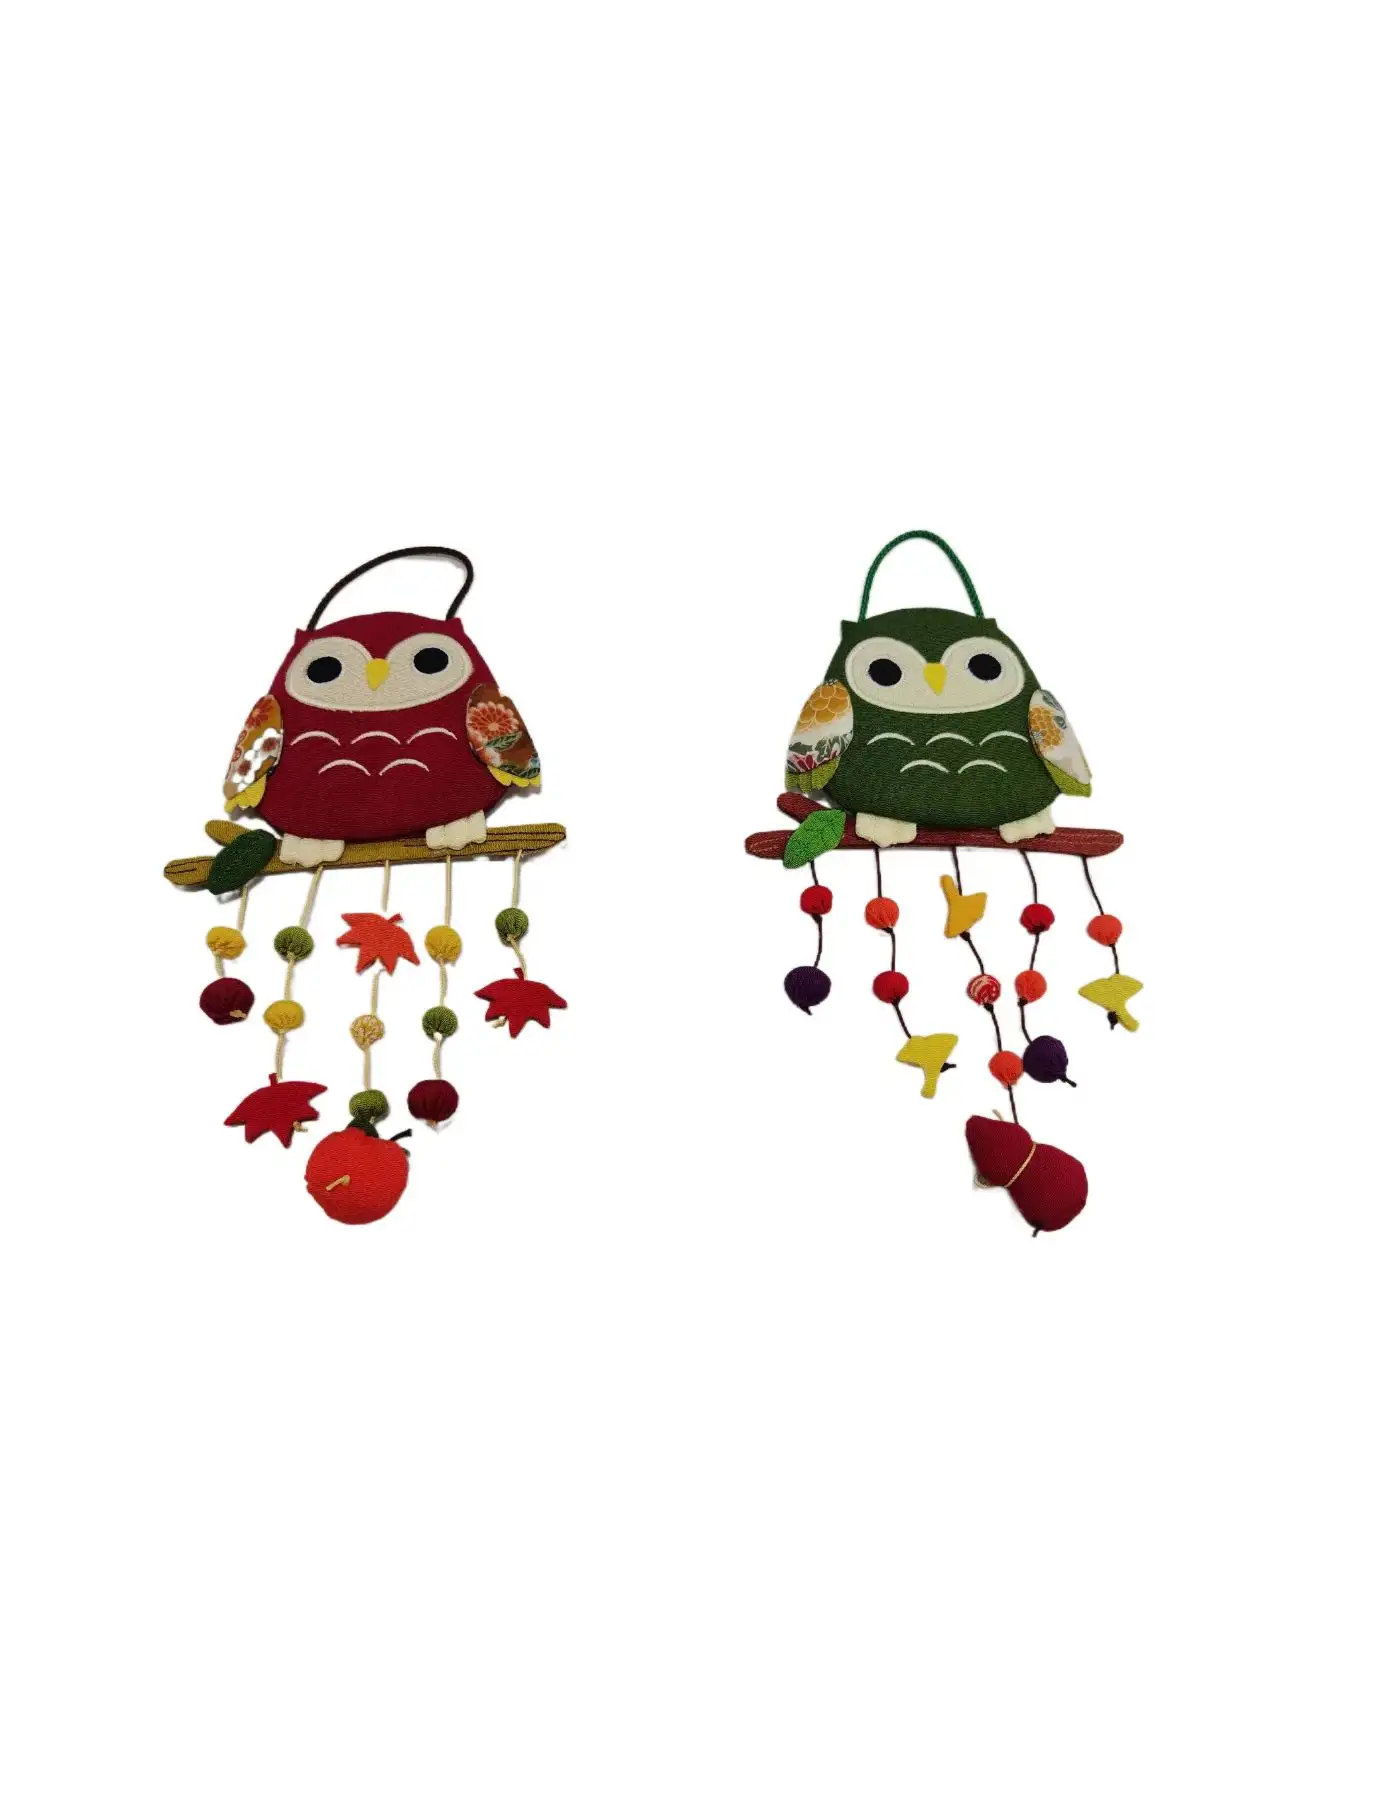 Best Selling Wall Decoration Handmade Japanese Owl 2 Patterns Set Hanging Toys